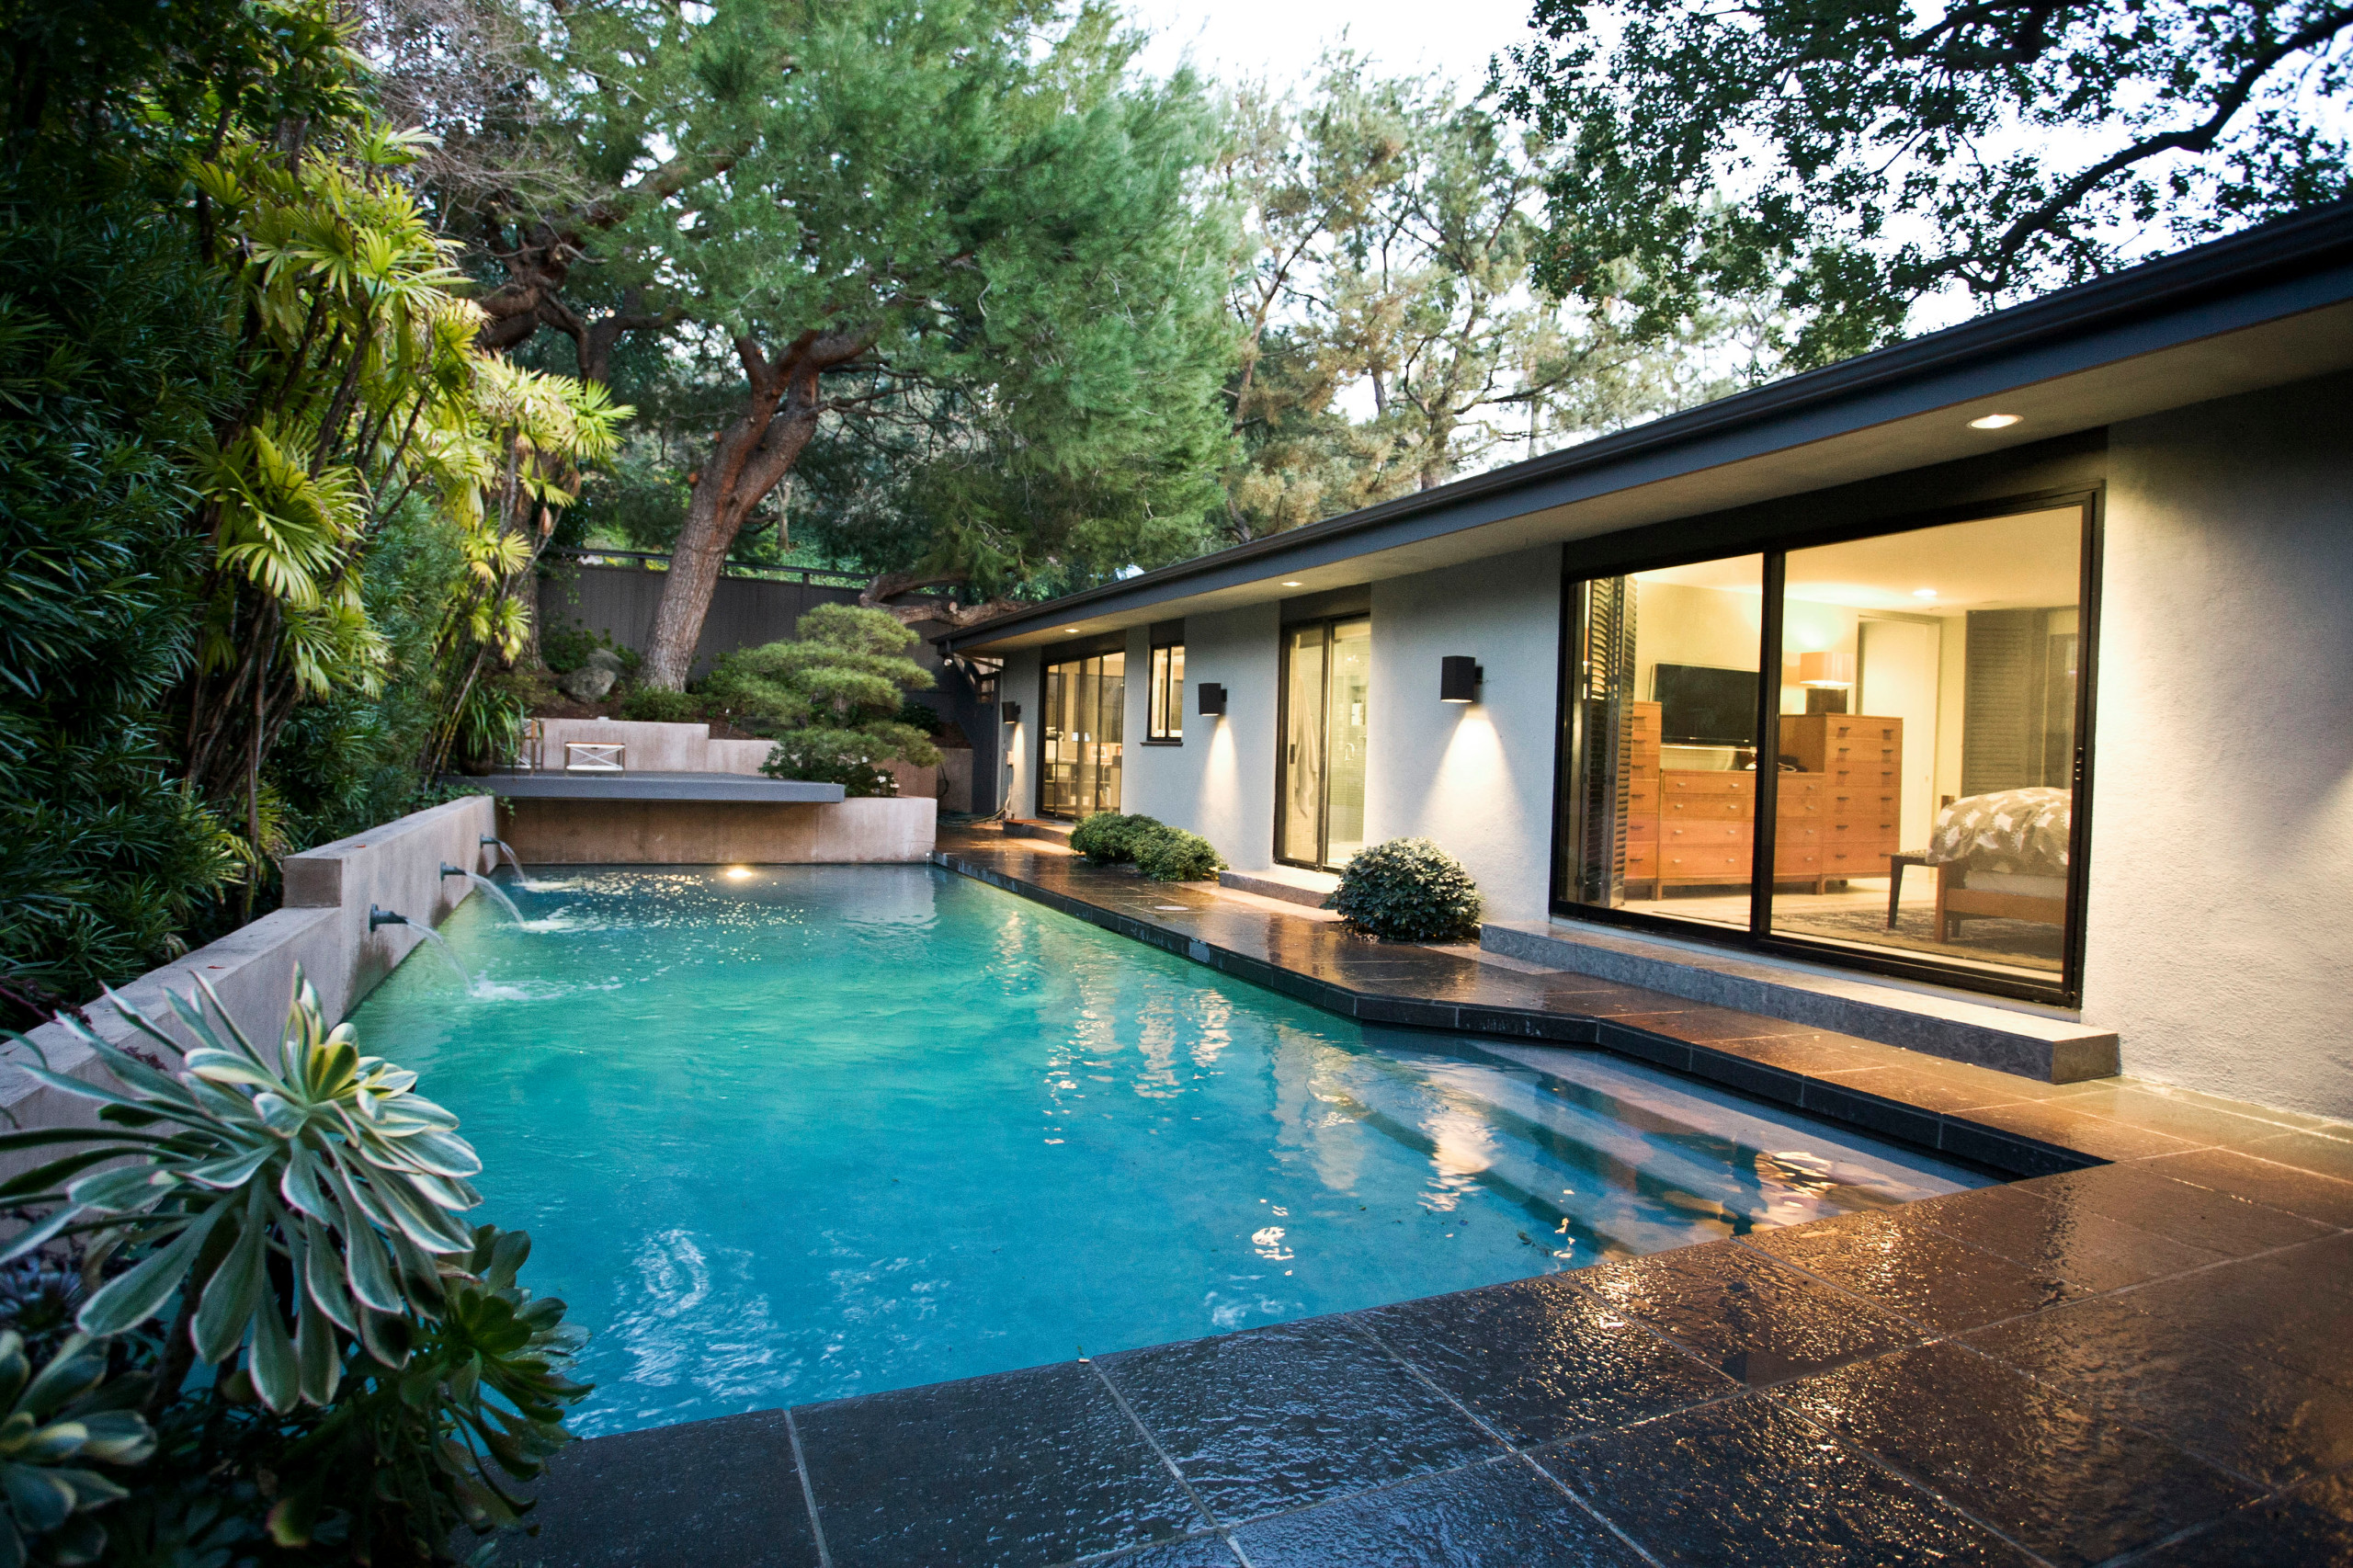 A Classic 1940's Mid Century Modern Home with Asian Design Influences